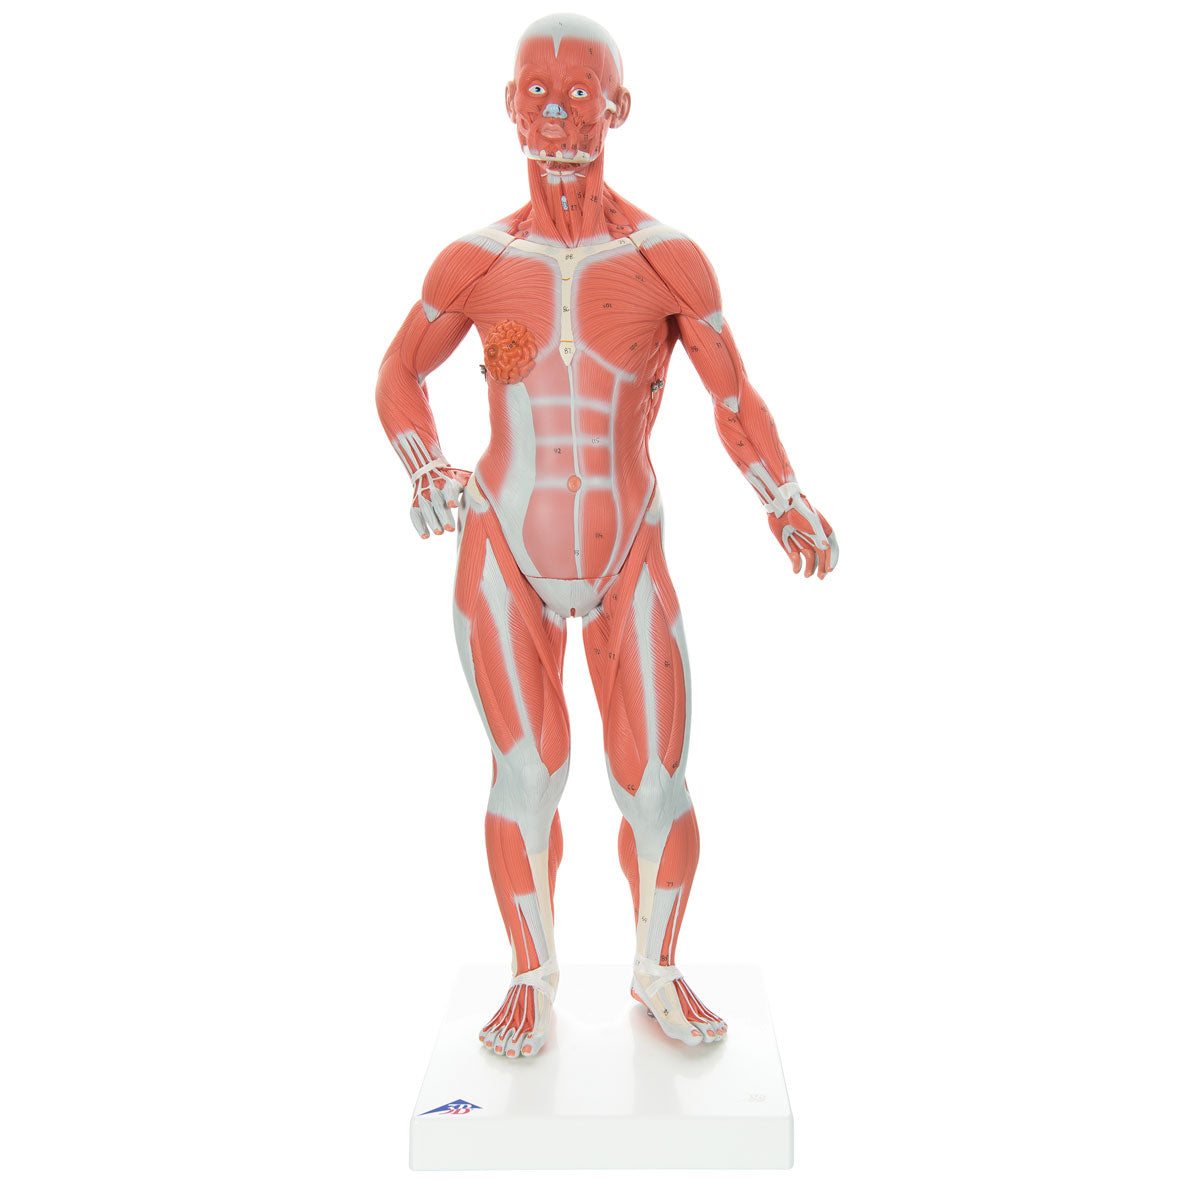 Muscle figure 57 cm in 2 parts